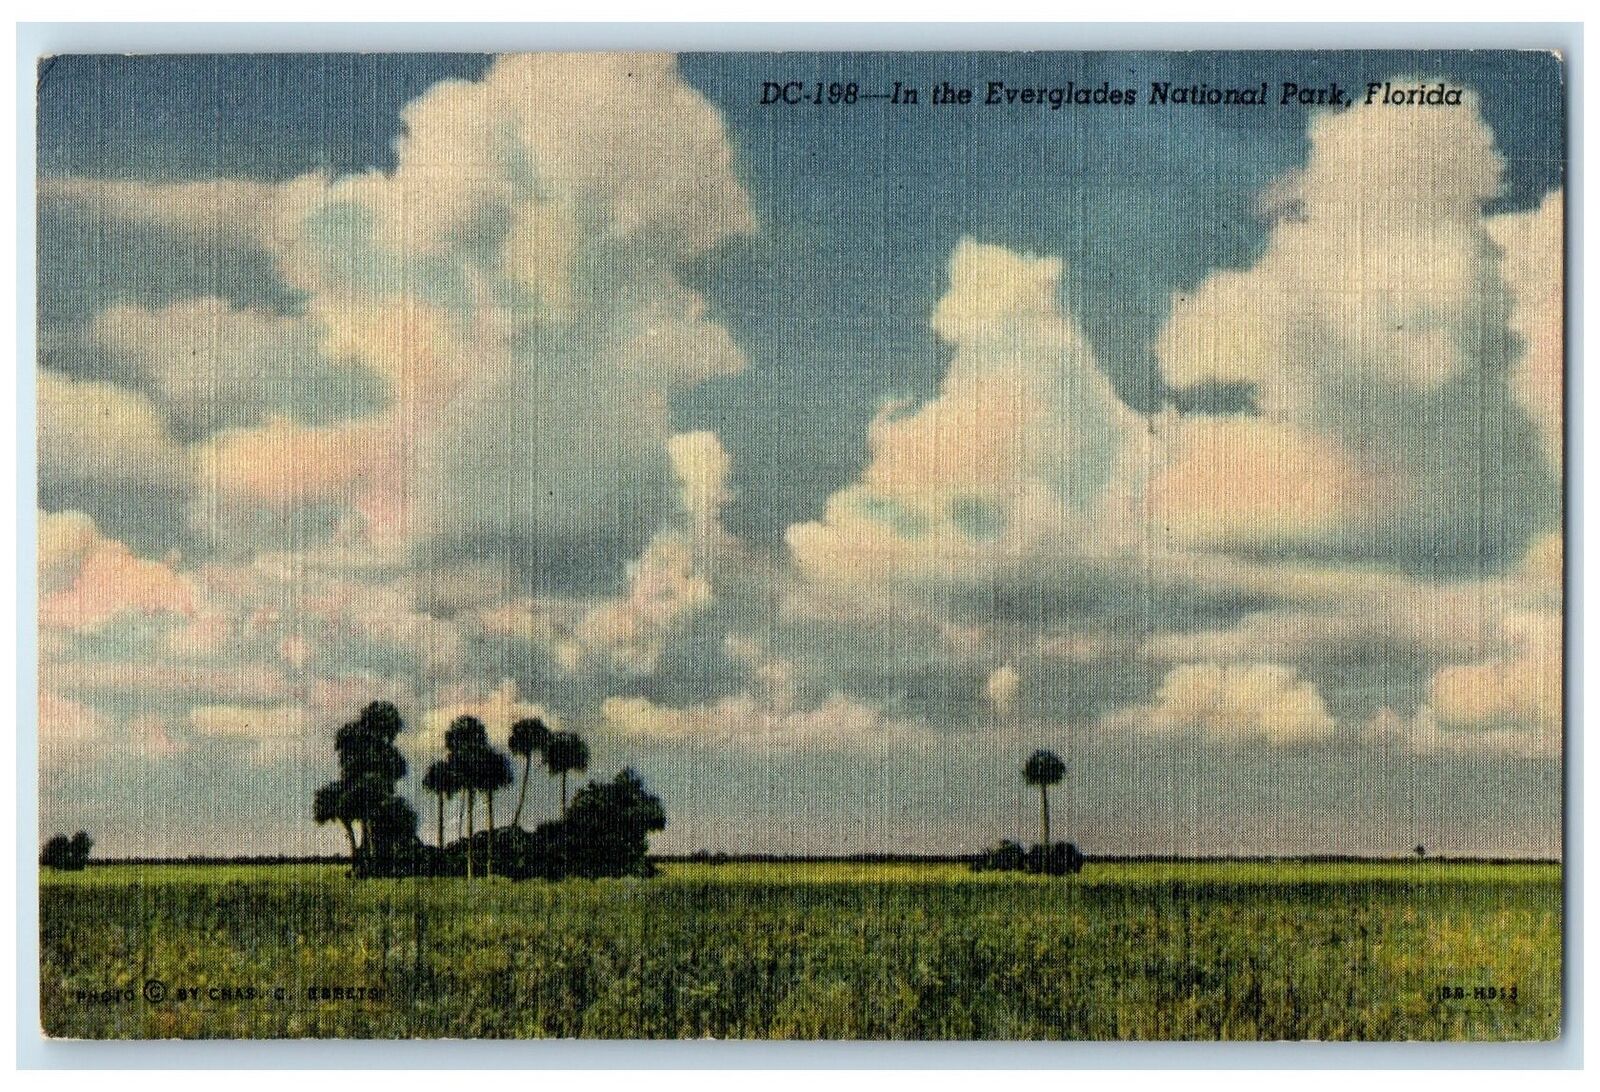 1948 In The Everglades National Park Everglades Florida FL Posted Cloud Postcard